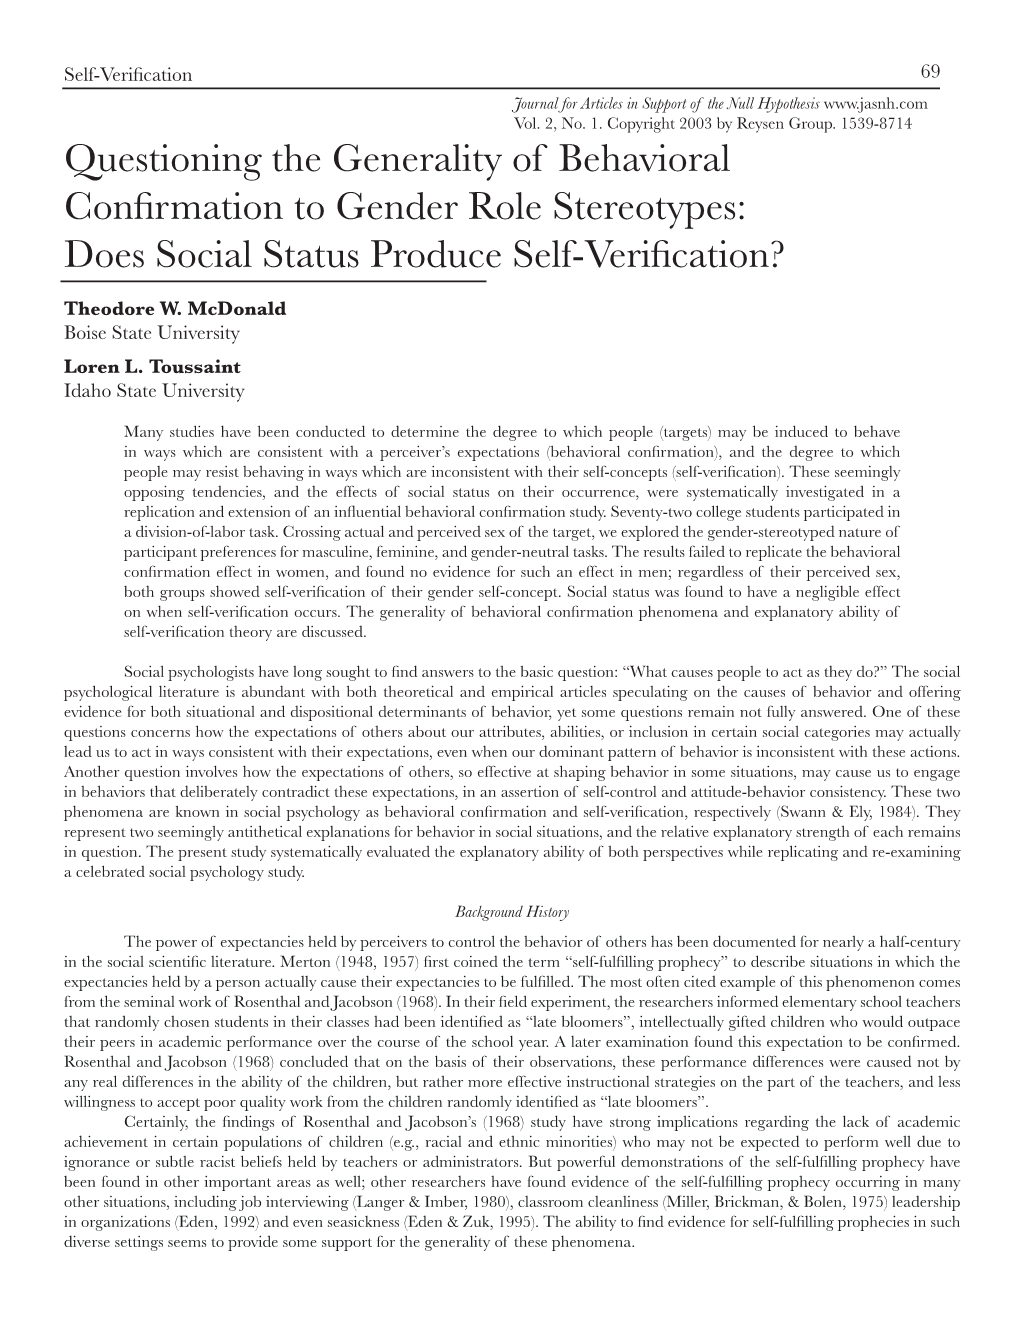 Questioning the Generality of Behavioral Confirmation to Gender Role Stereotypes: Does Social Status Produce Self-Verification?